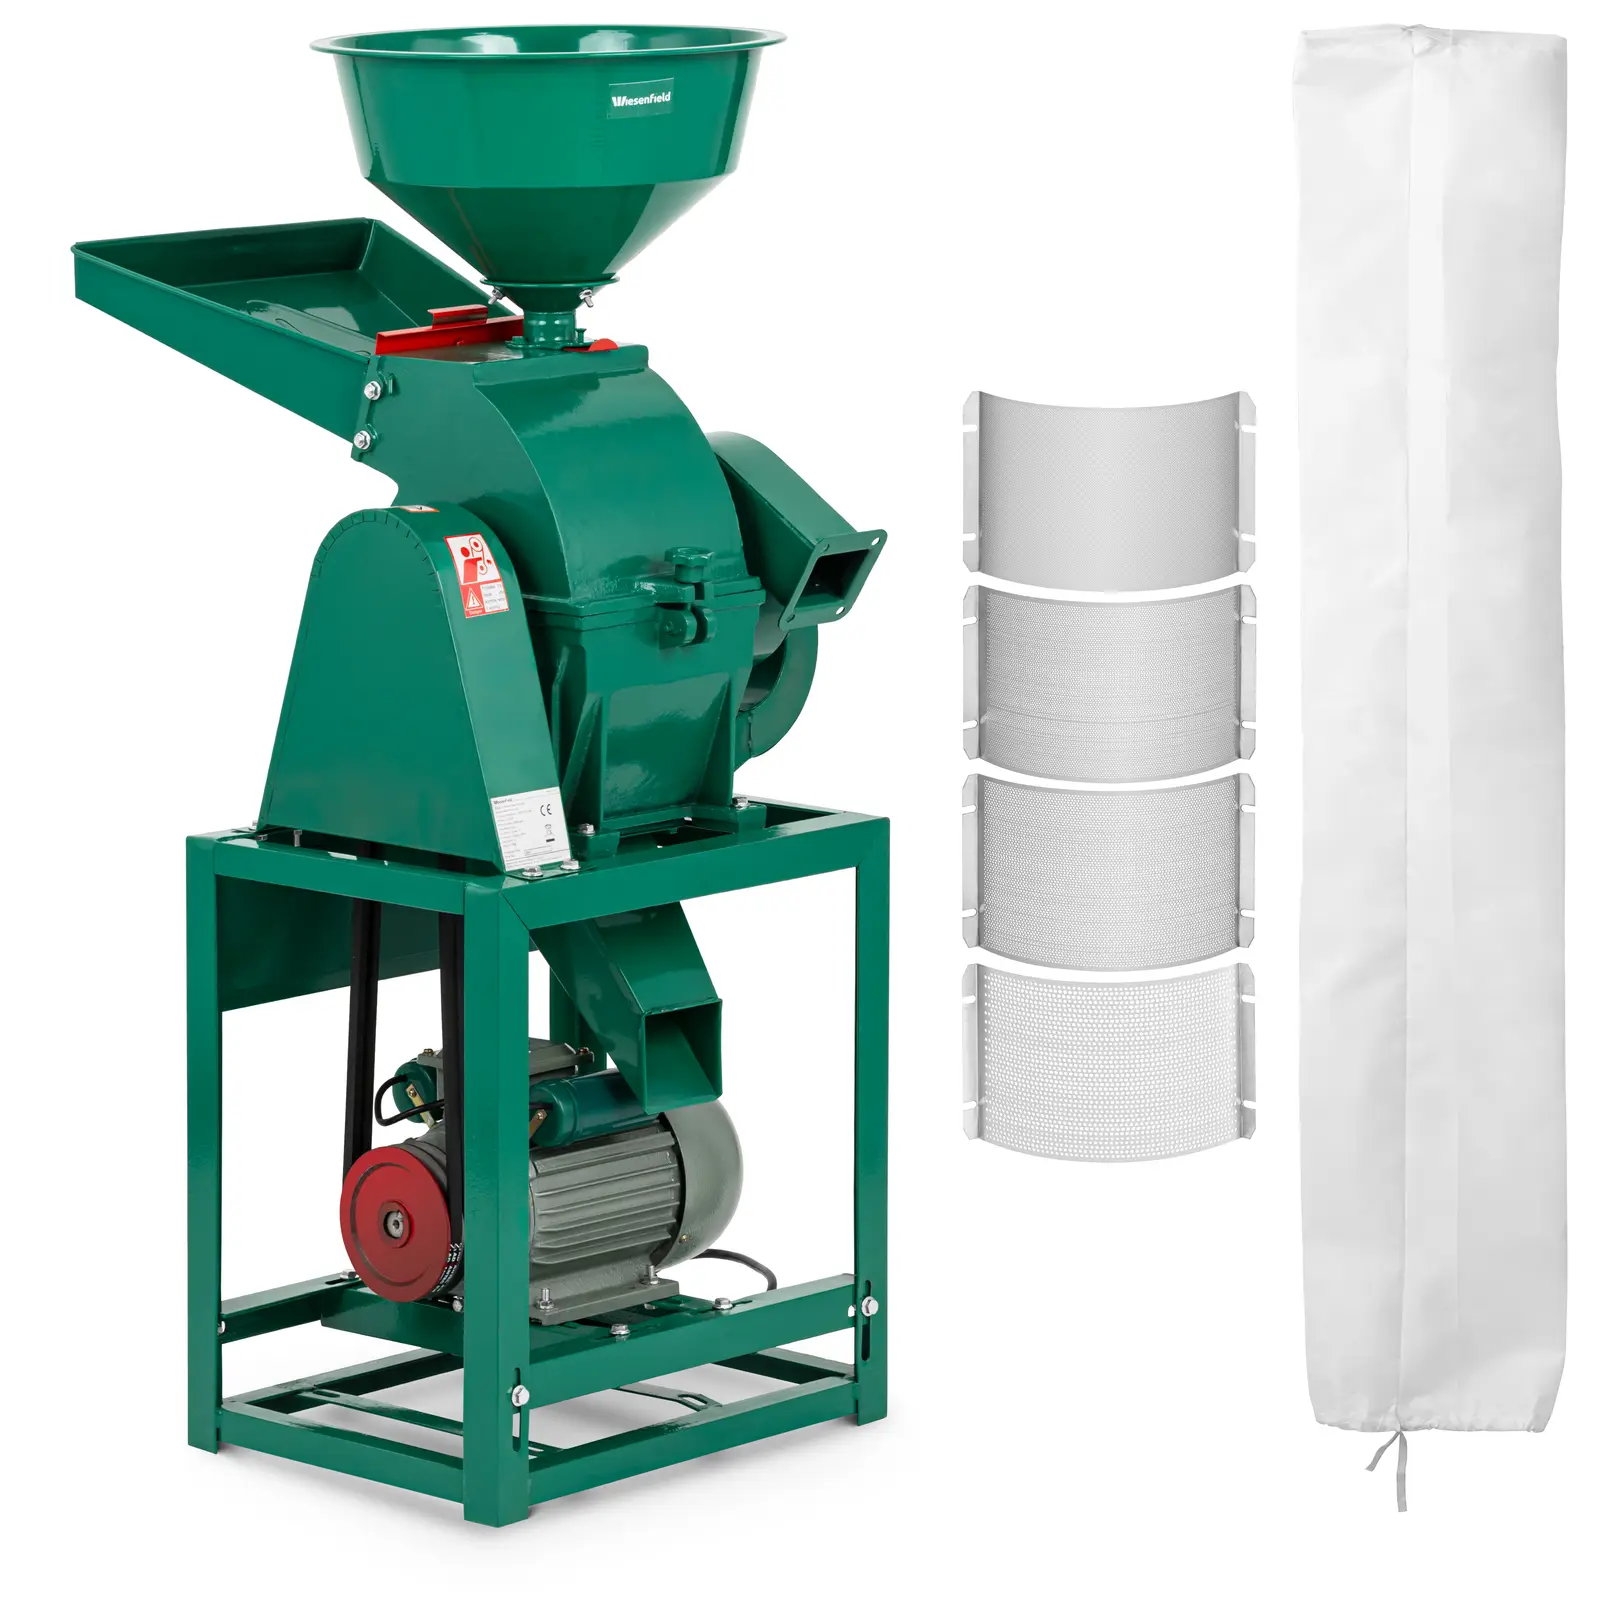 Hammer Mill - 2.2 kW - up to 400 kg/h